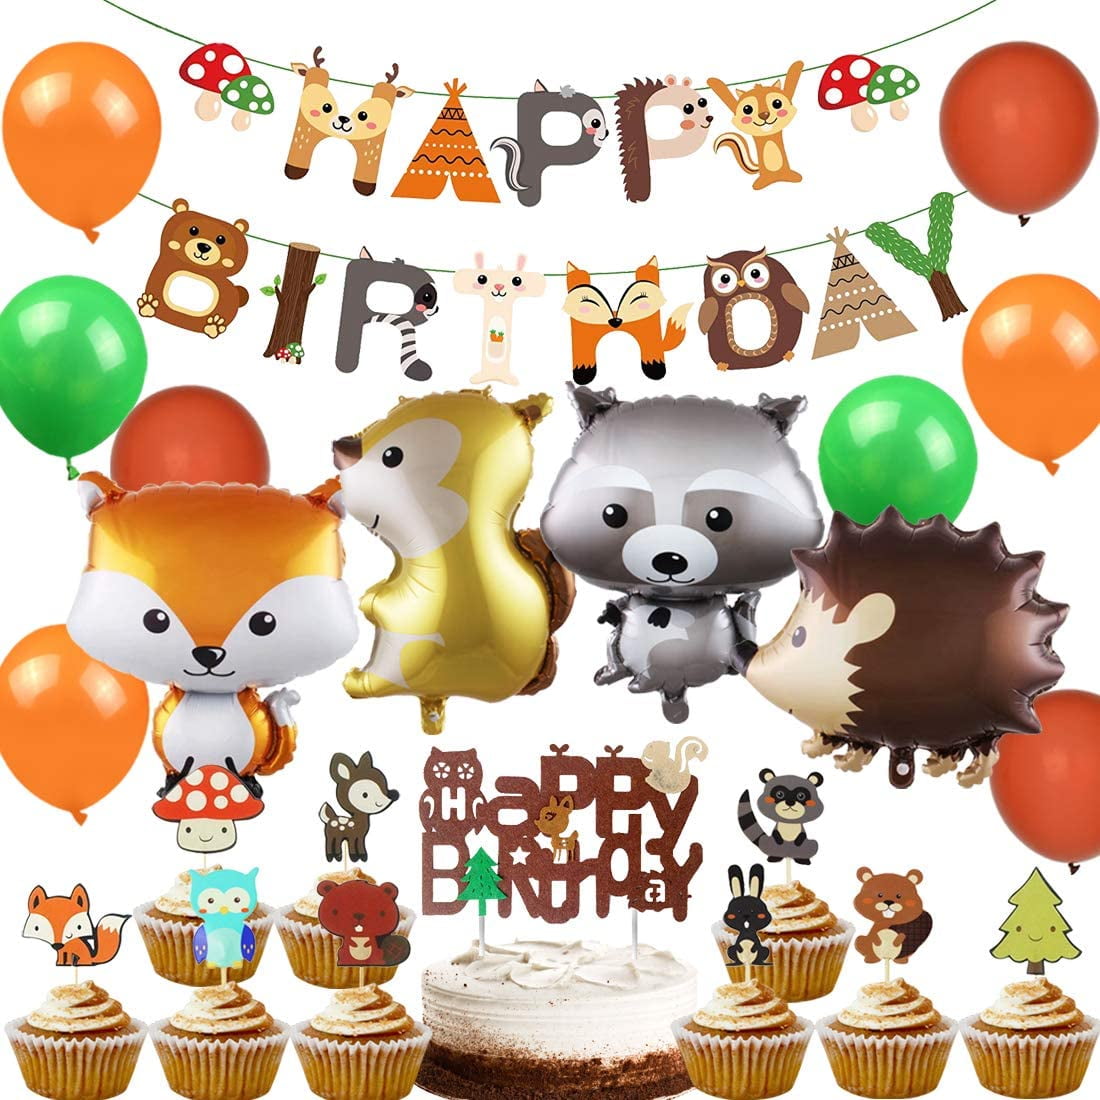 Details about   Premium Paper Cake Topper Cupcake Decor Happy Birthday Banner Favors Tab 